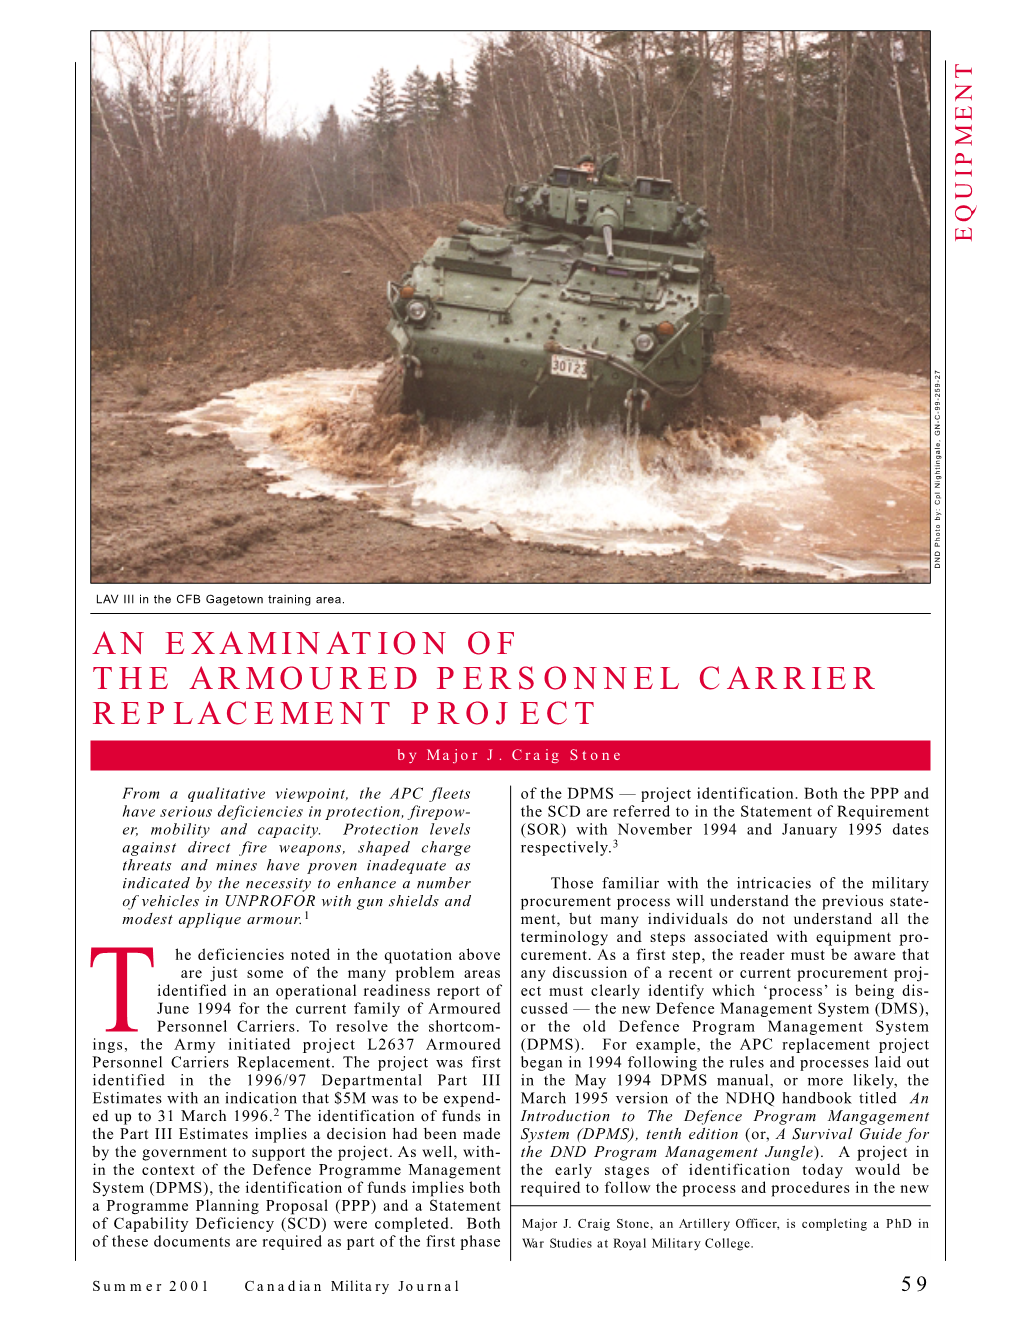 An Examination of the Armoured Personnel Carrier Replacement Project